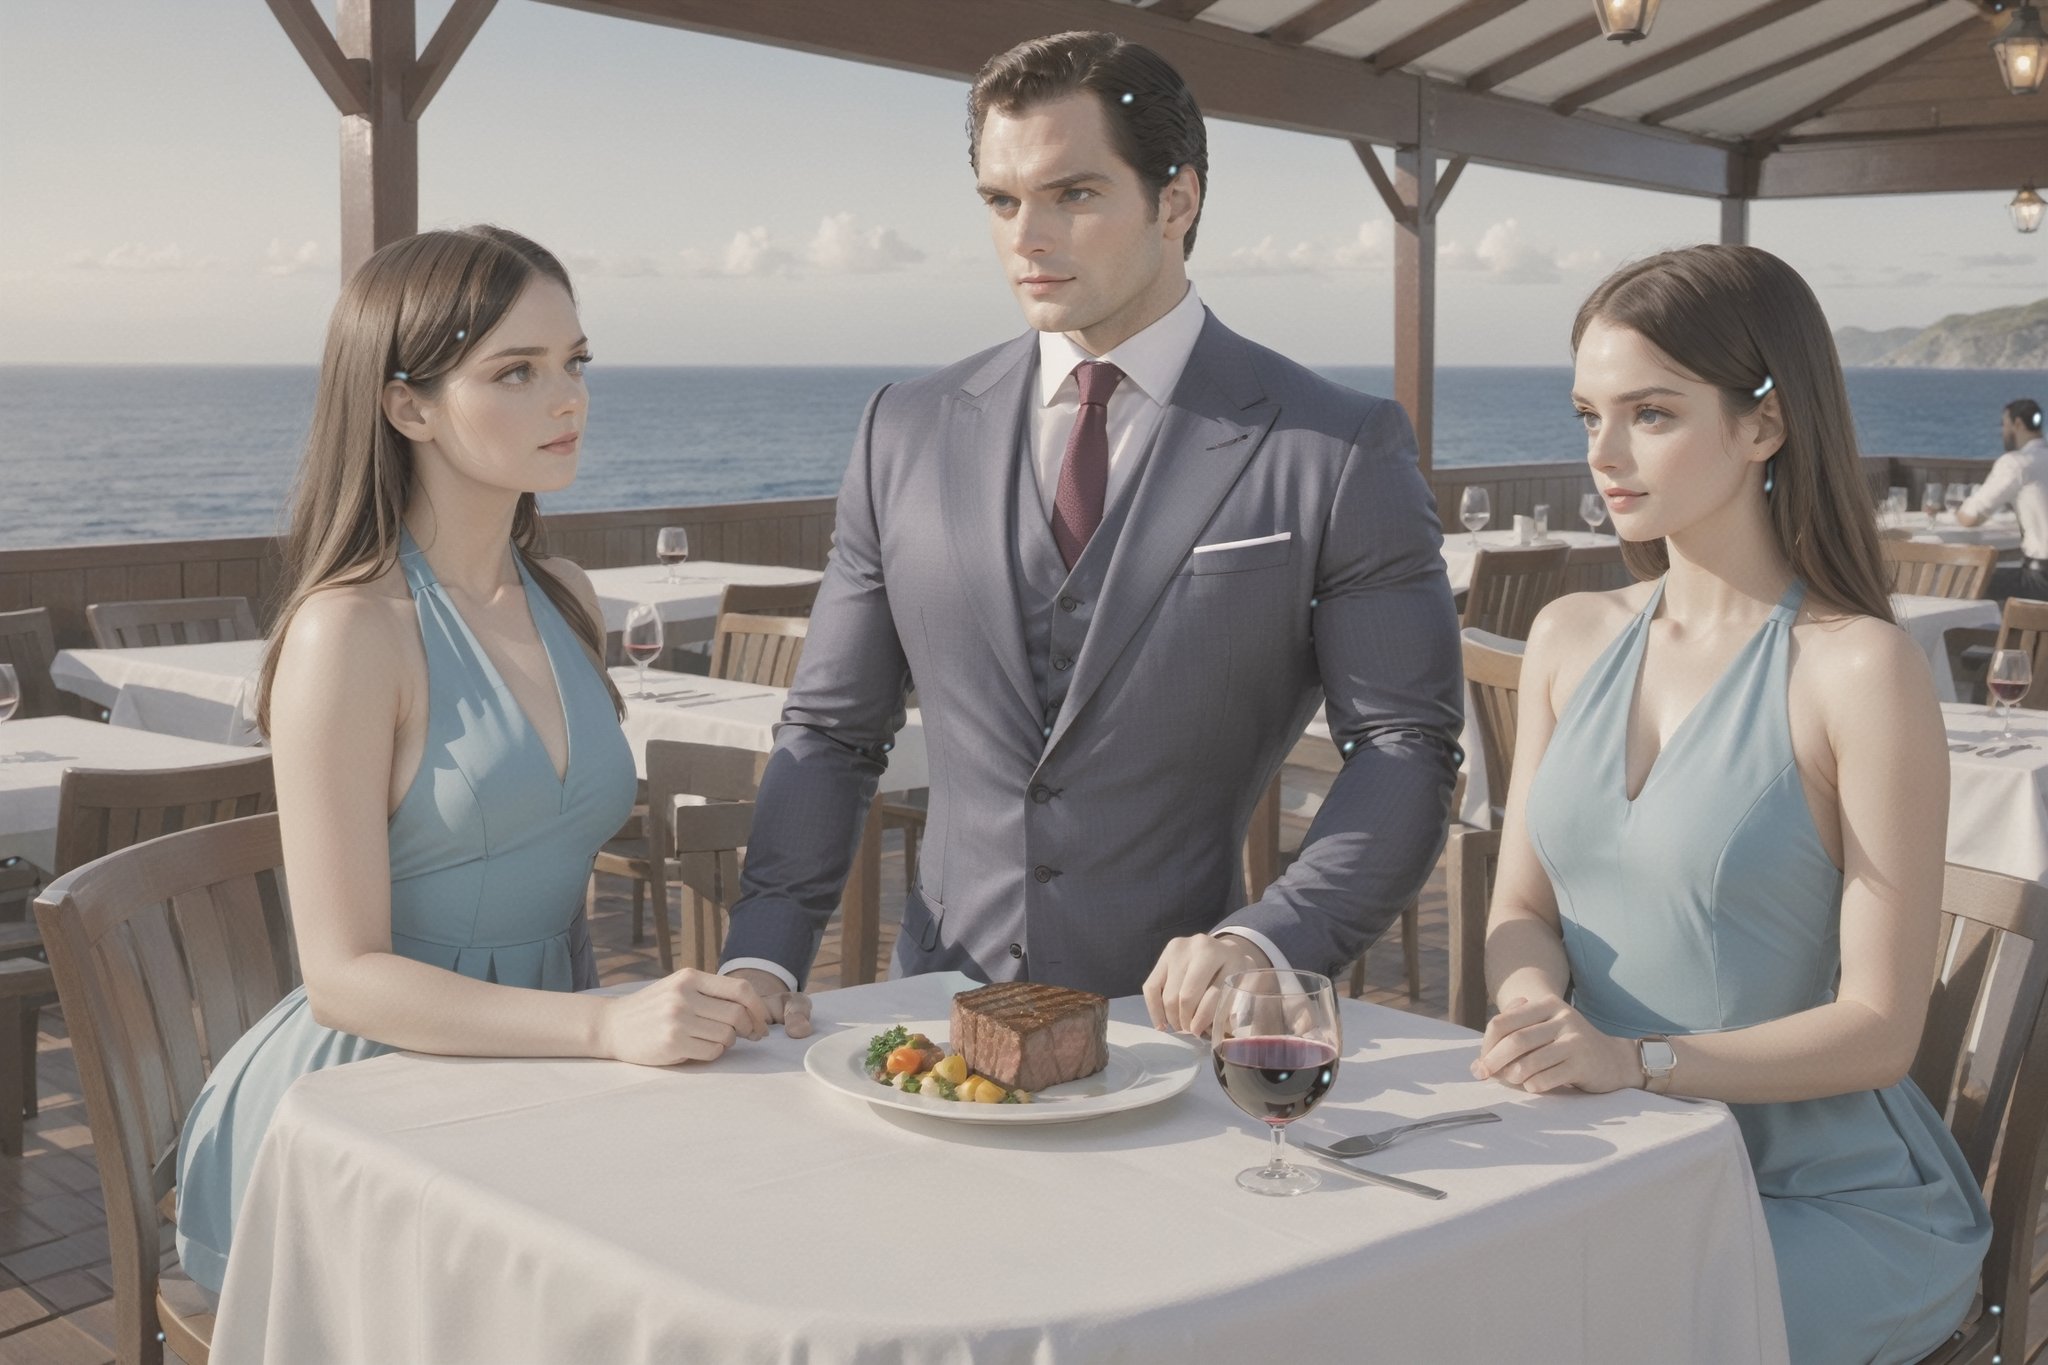 Henry Cavill wearing business suit with 2girls(Frieren and aura) both wearing nice dress, steak and wine on the table, fantasy, (Shot from distance),background(ocean, outdoor restaurant)(masterpiece, highres, high quality:1.2), ambient occlusion, low saturation, High detailed, Detailedface, Dreamscape,Extremely Realistic